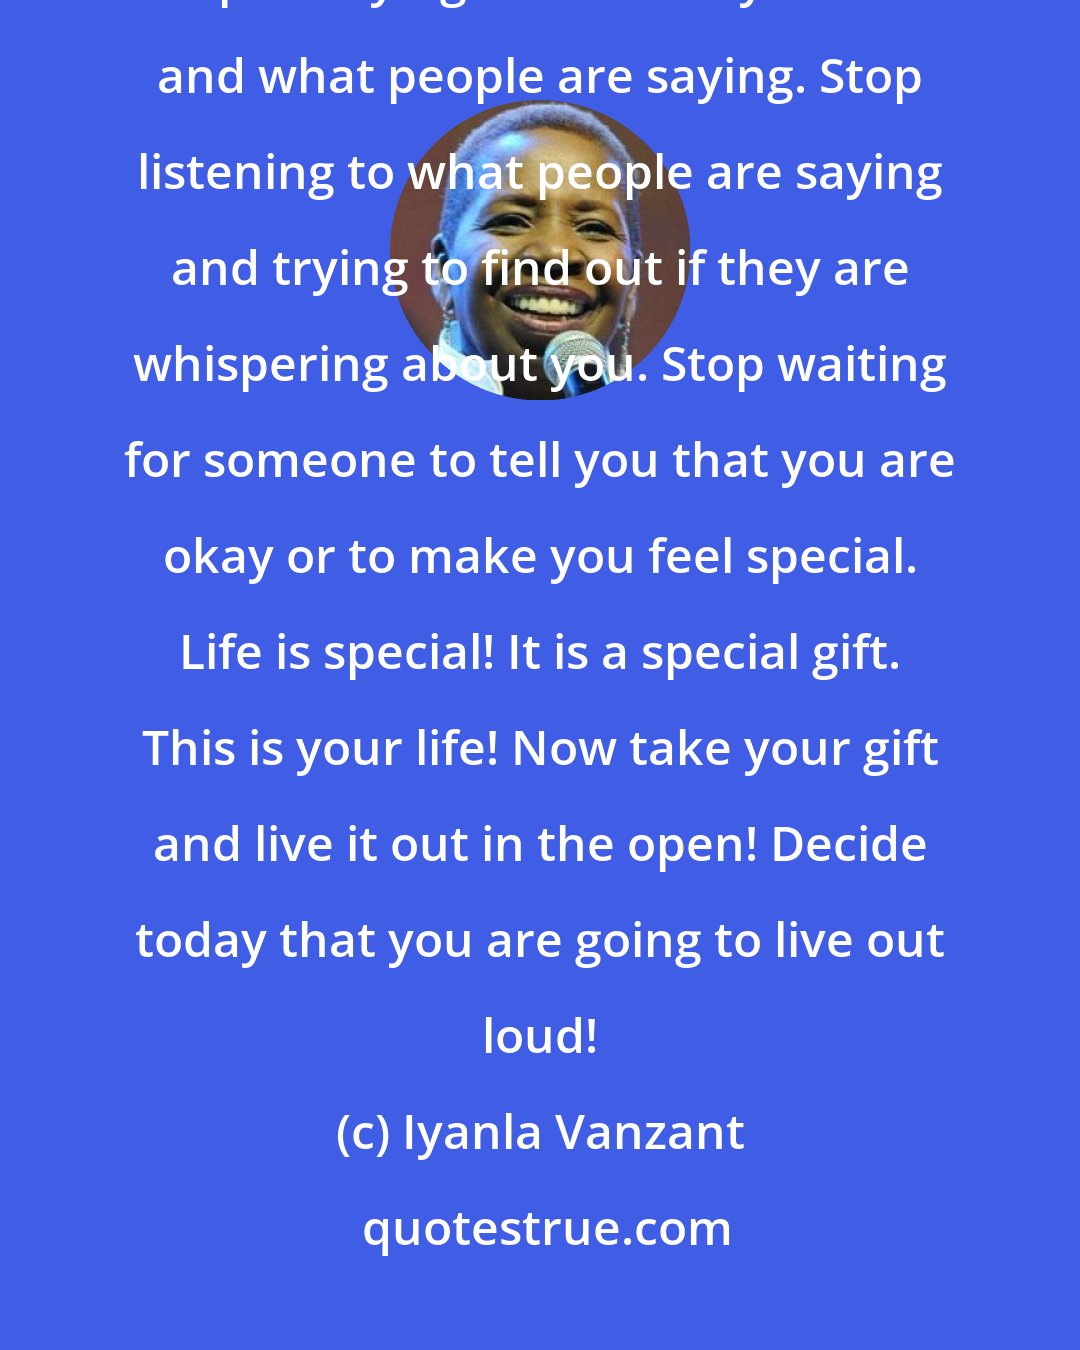 Iyanla Vanzant: Stop hiding! Stop holding yourself back and playing yourself down! Stop worrying about how you look and what people are saying. Stop listening to what people are saying and trying to find out if they are whispering about you. Stop waiting for someone to tell you that you are okay or to make you feel special. Life is special! It is a special gift. This is your life! Now take your gift and live it out in the open! Decide today that you are going to live out loud!